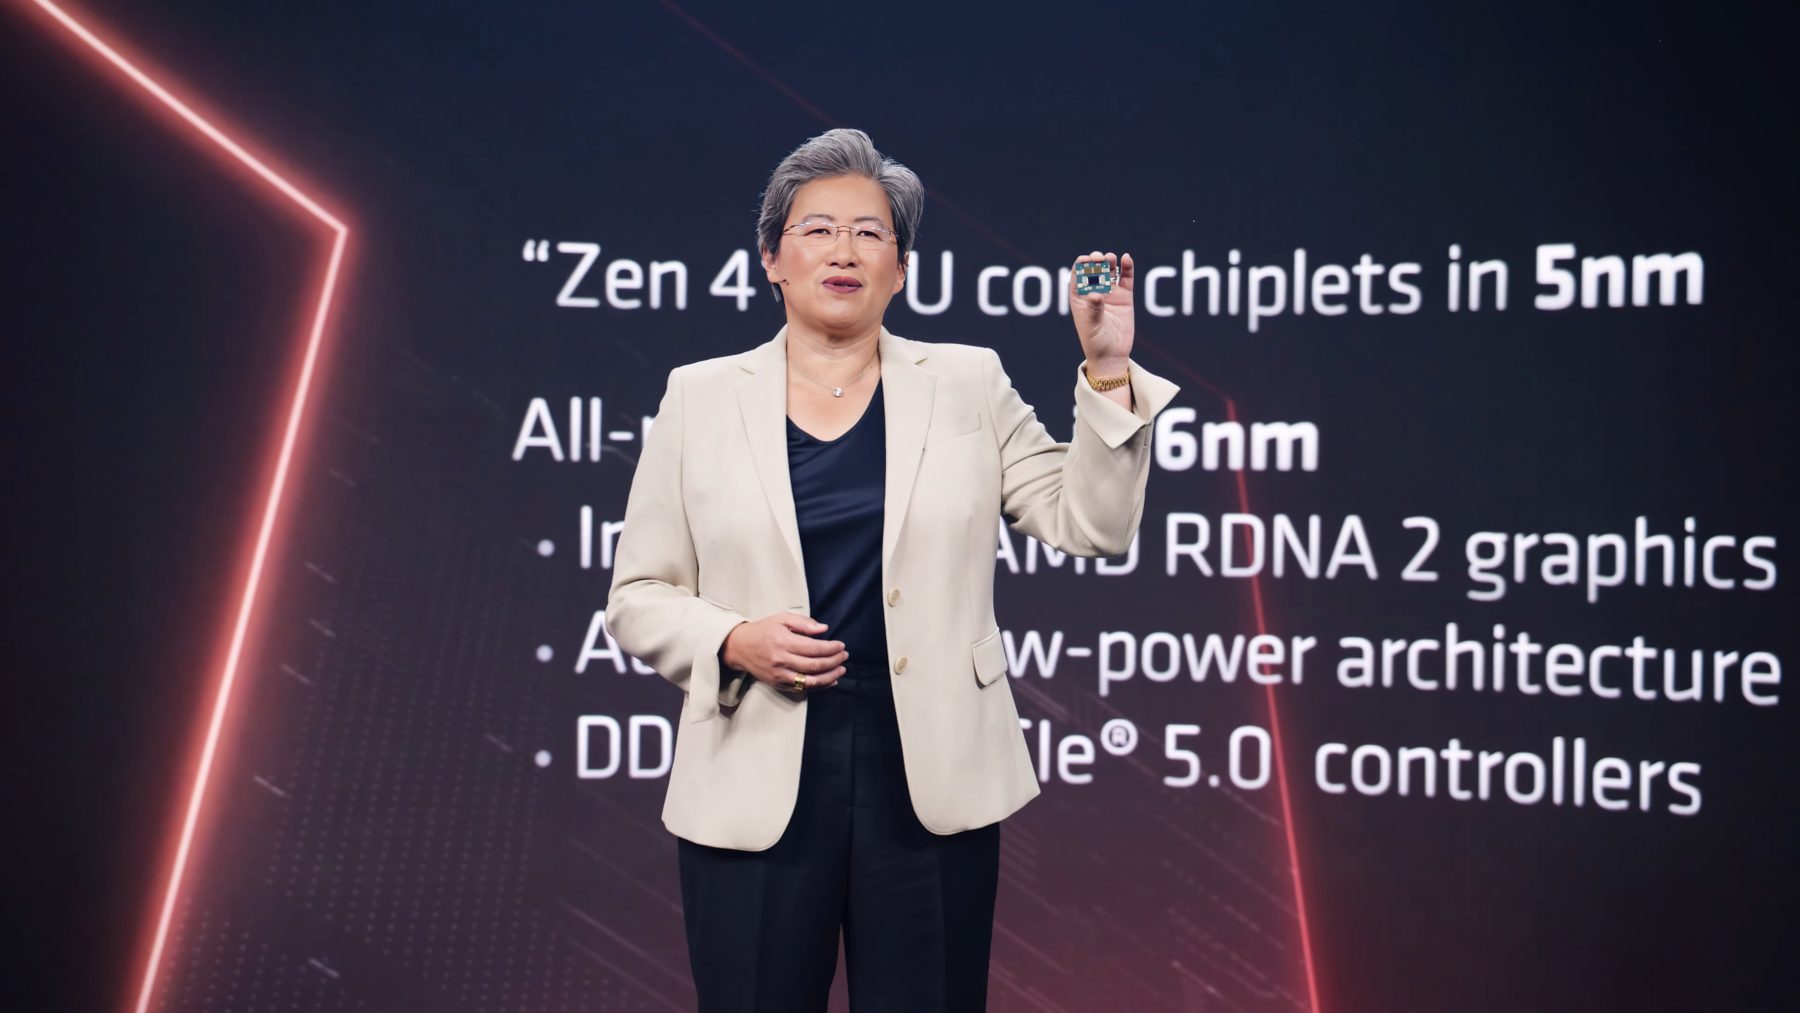 Amd Ryzen 7000 Detailed: Zen 4, Ddr5 And What To Expect